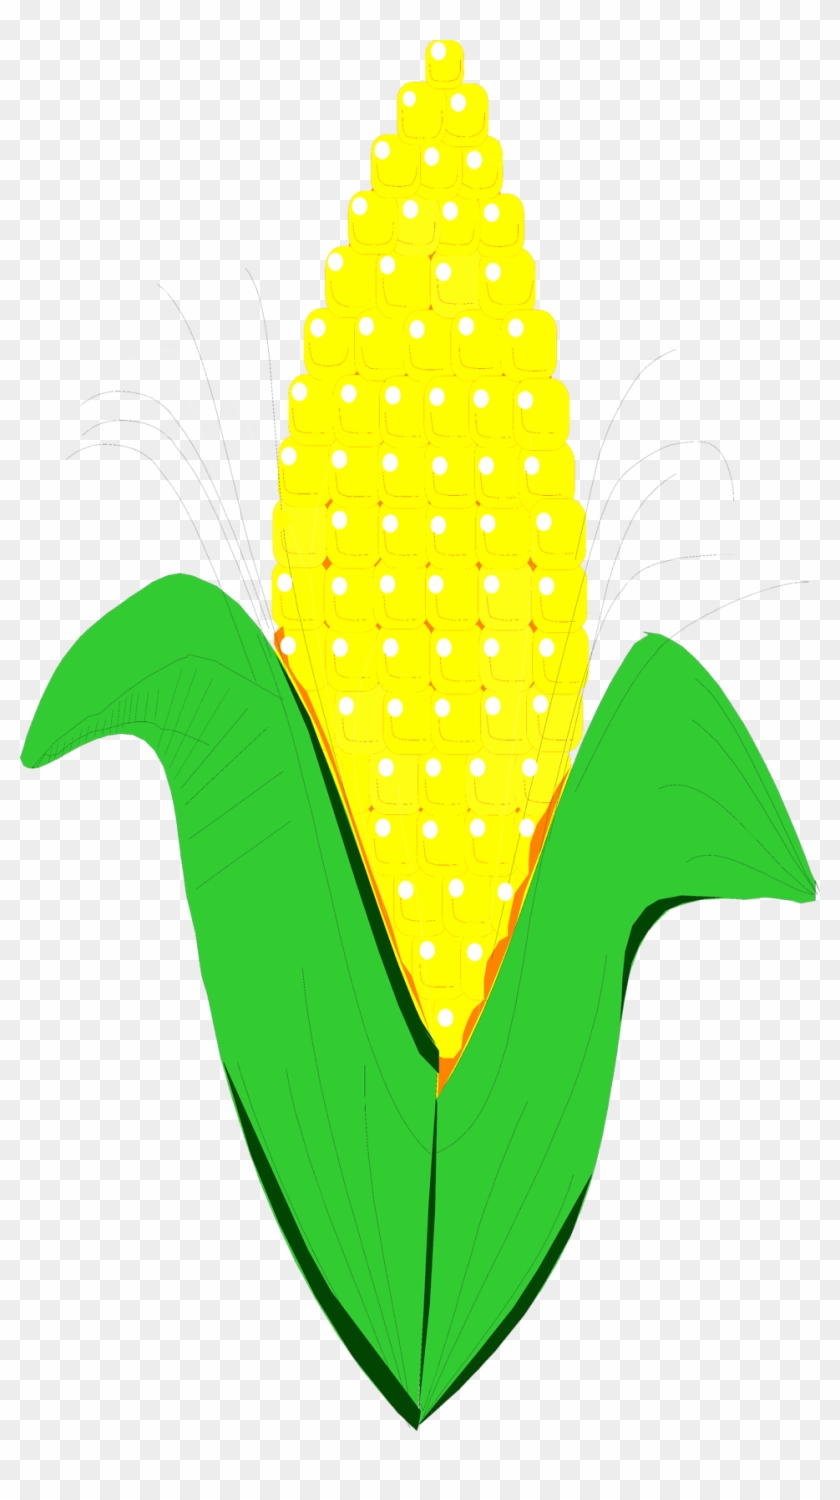 Drawing Of Corn Clipart Free Clip Art Images Corn Clipart No Background Free Transparent Png Clipart Images Download